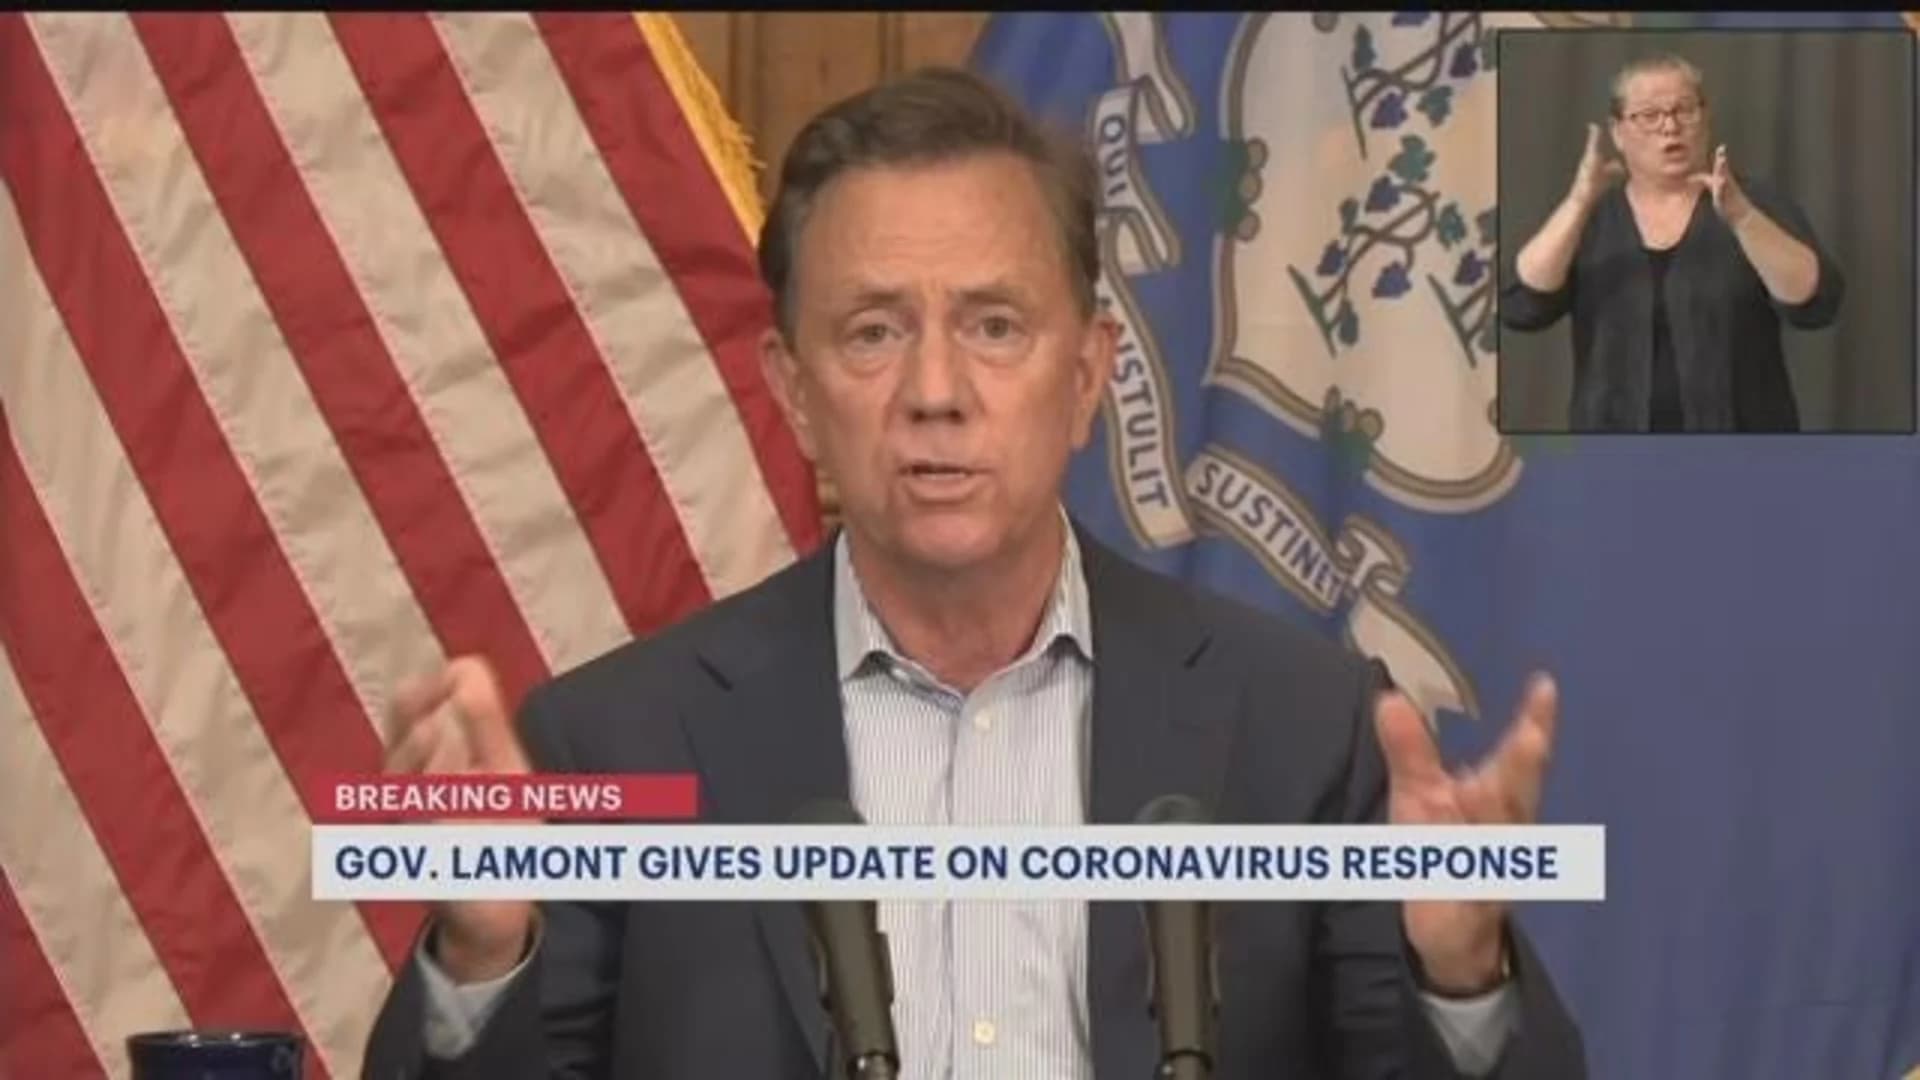 Lamont: People in their 20s now make up biggest age group of coronavirus cases